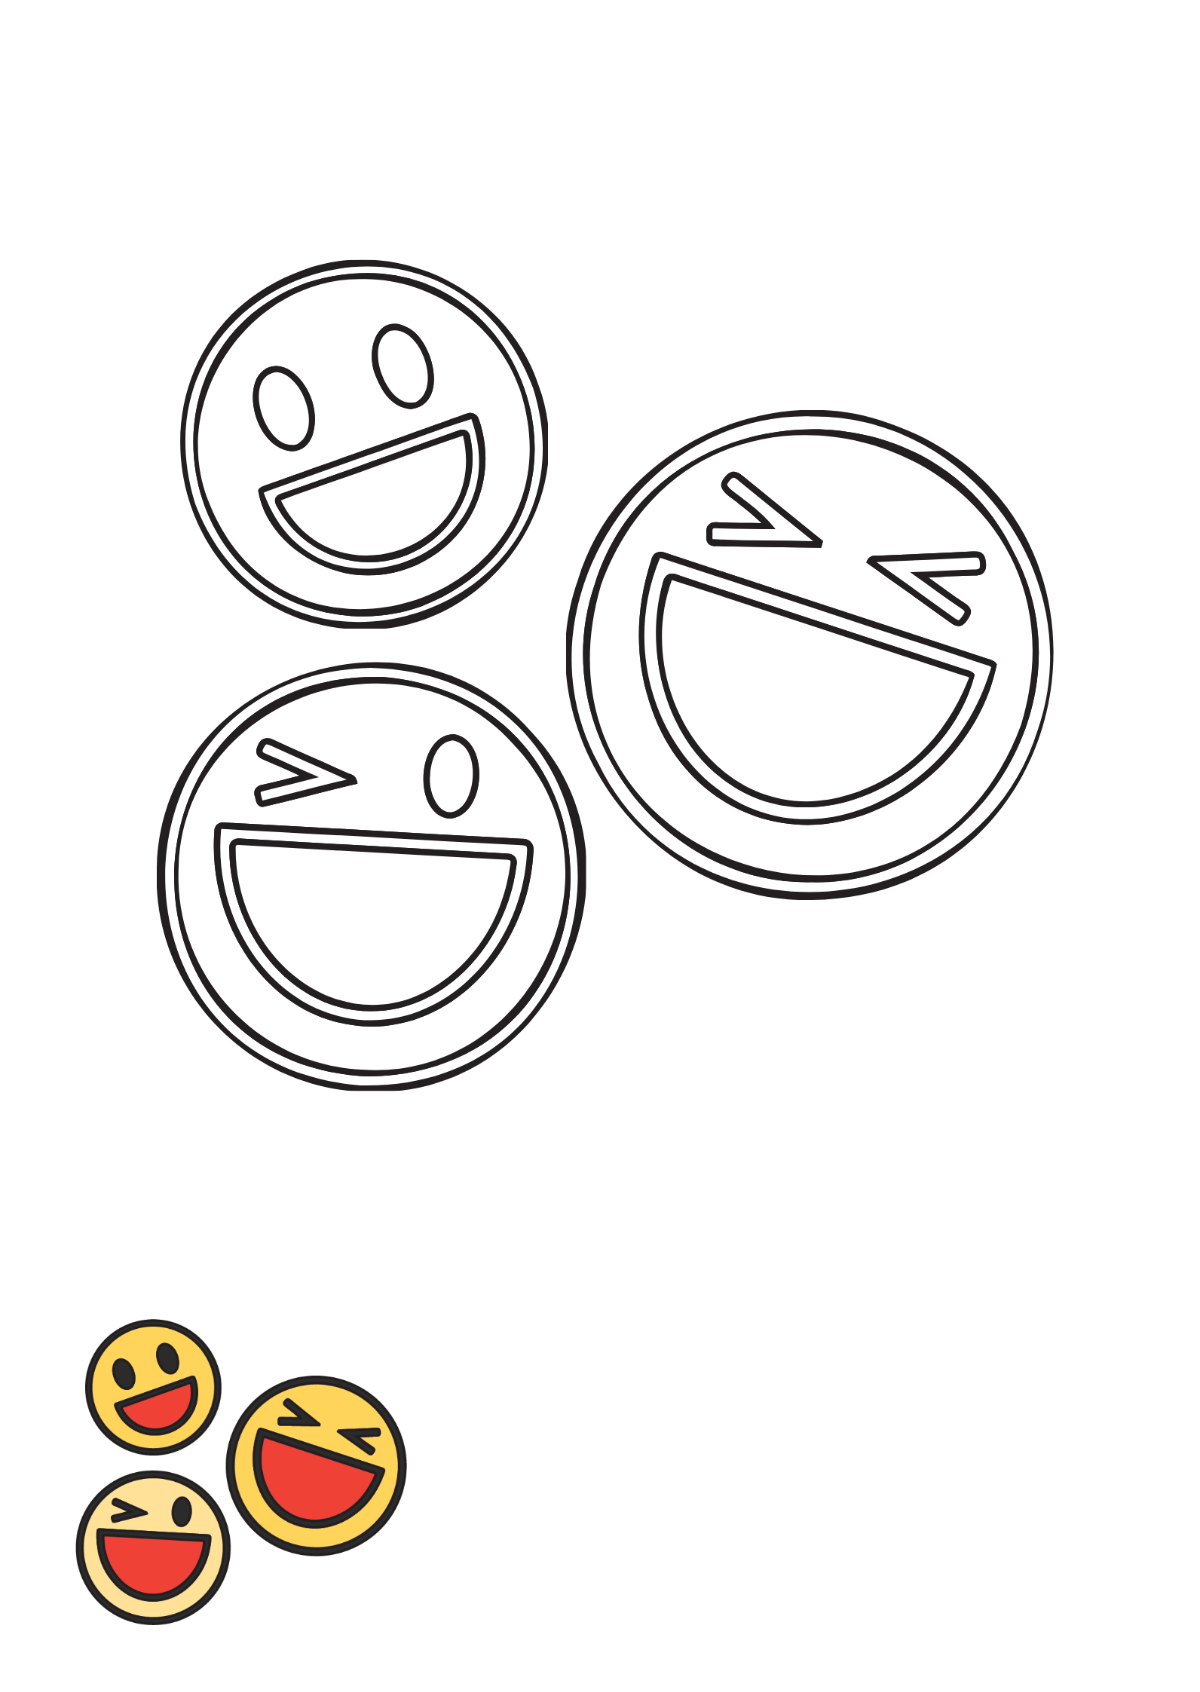 Transparent Smiley coloring page Template